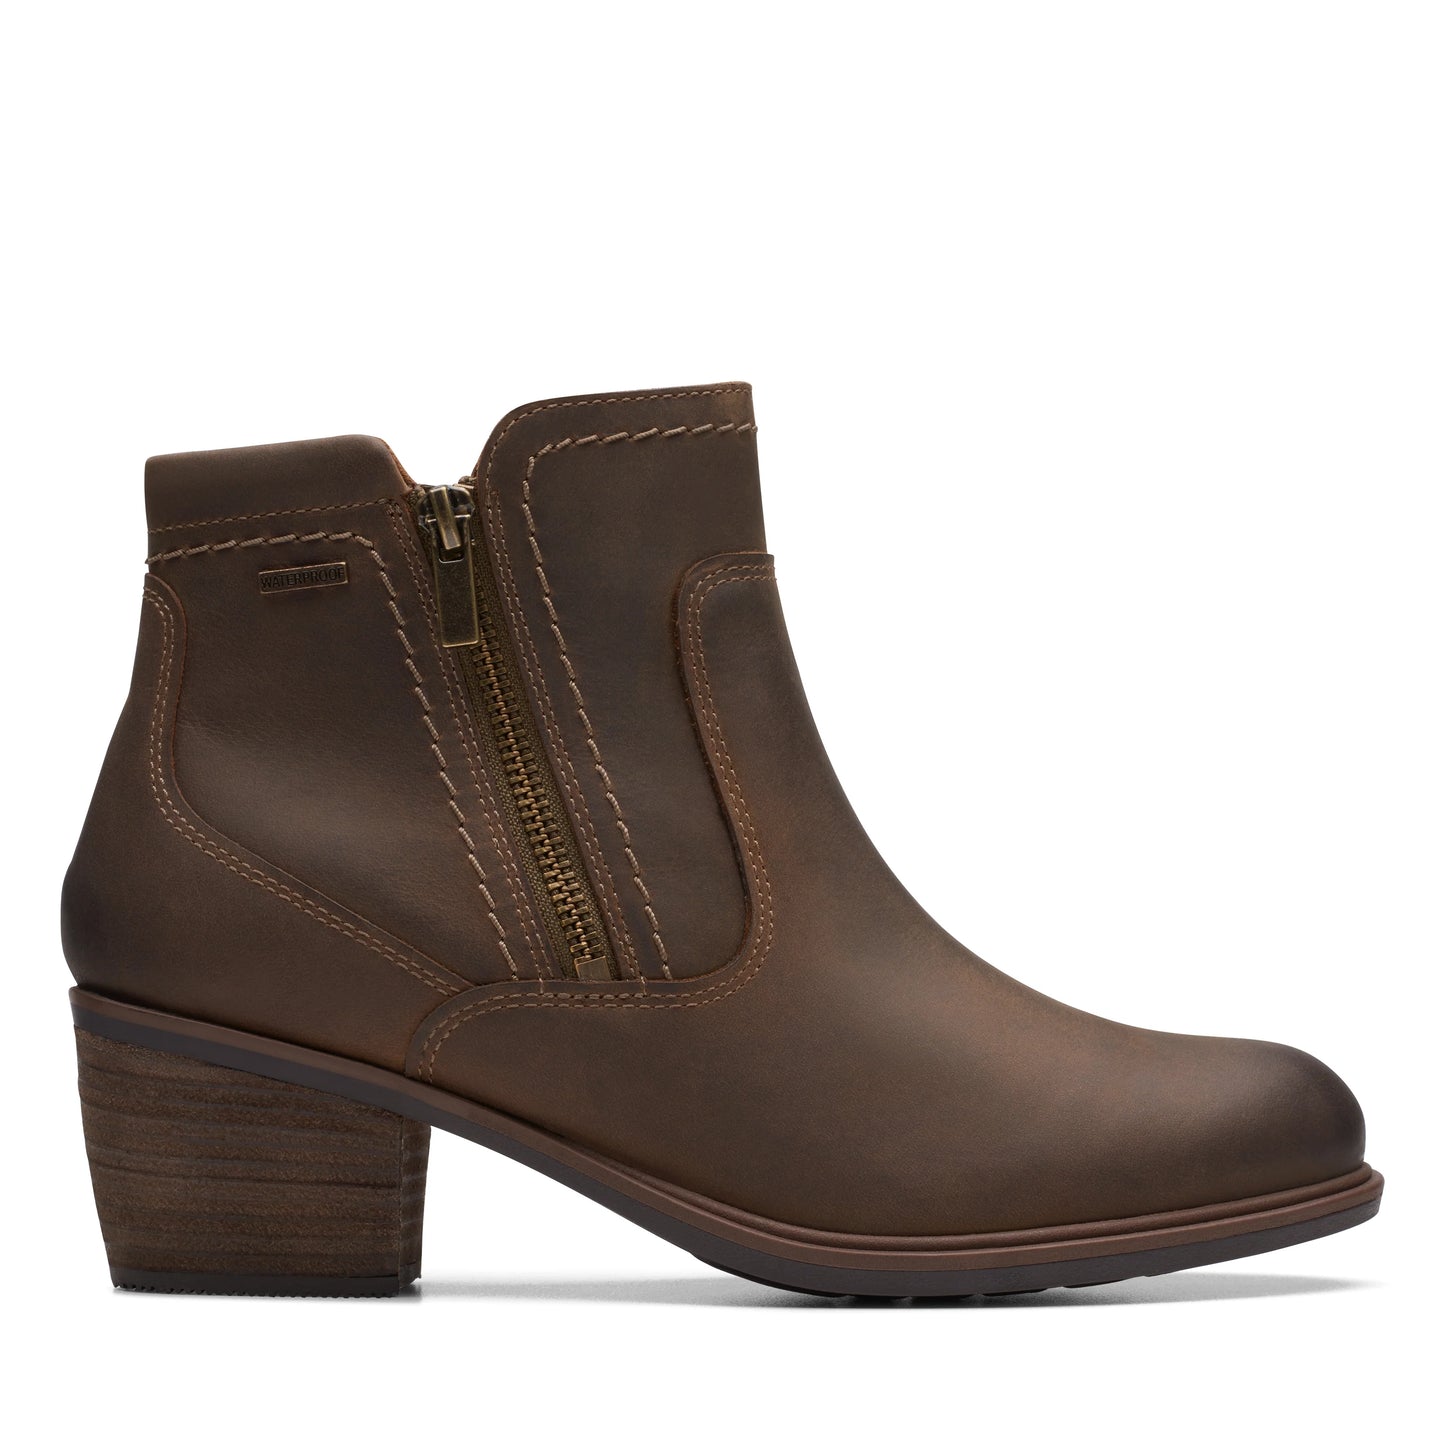 CLARKS | BOTINES MUJER | NEVA ZIP WP TAUPE LEATHER | MARRÓN